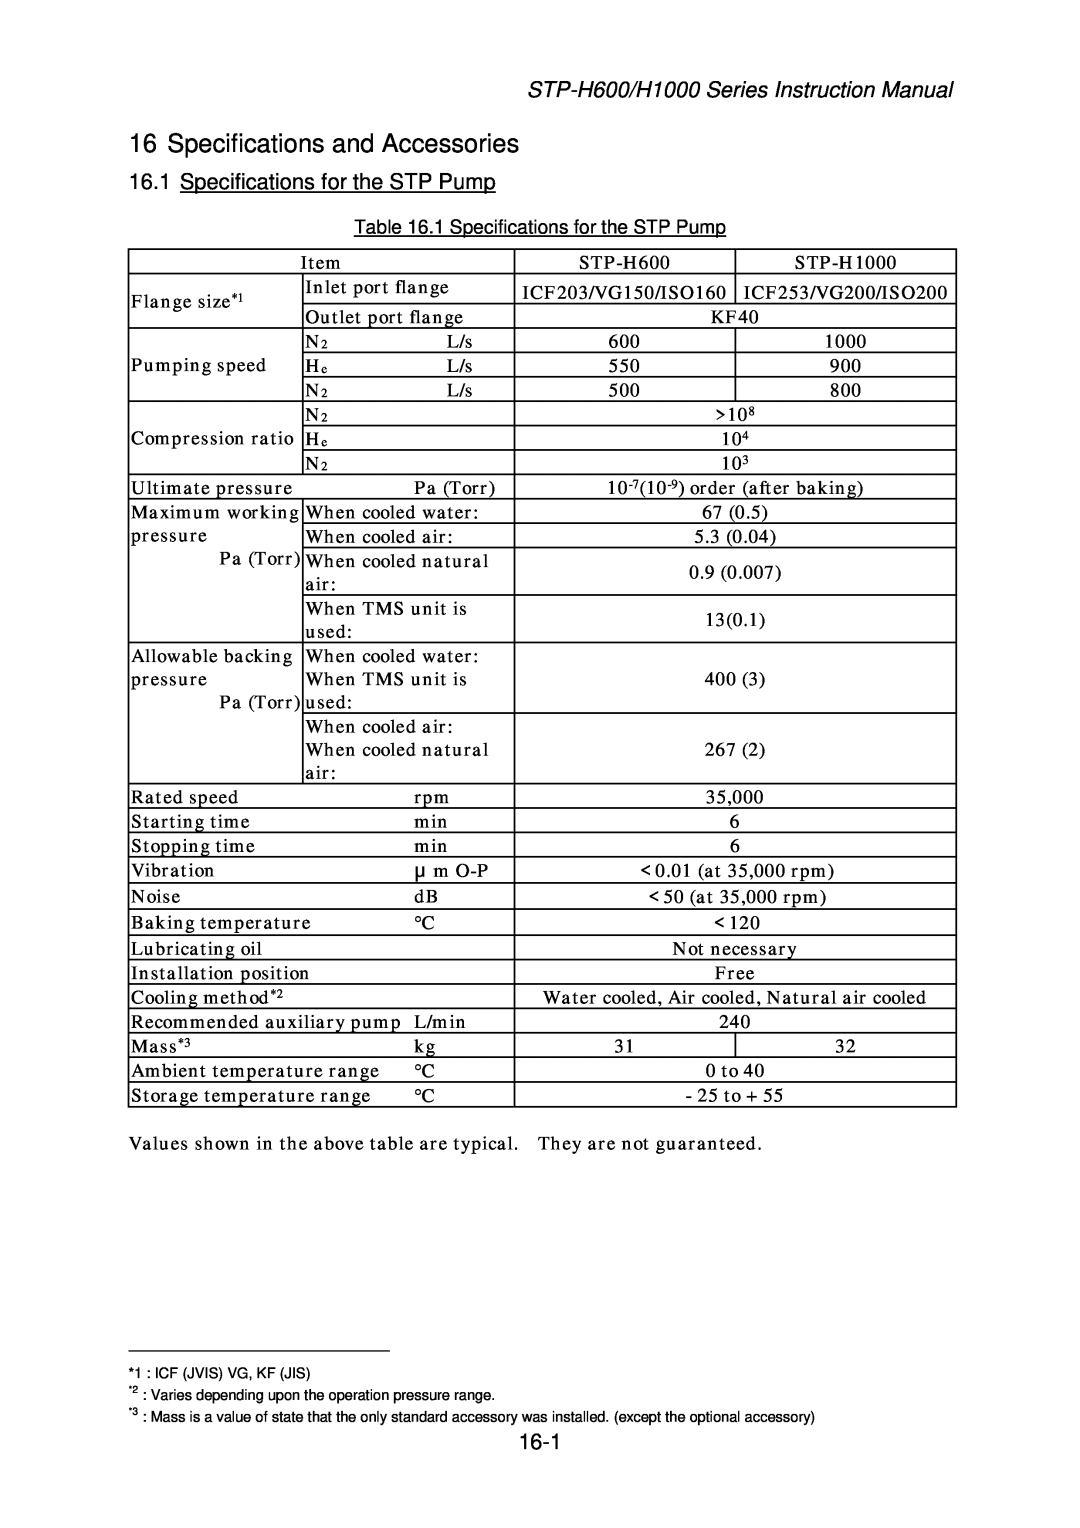 Seiko Instruments MT-17E-003-D instruction manual Specifications and Accessories, 16.1Specifications for the STP Pump, 16-1 